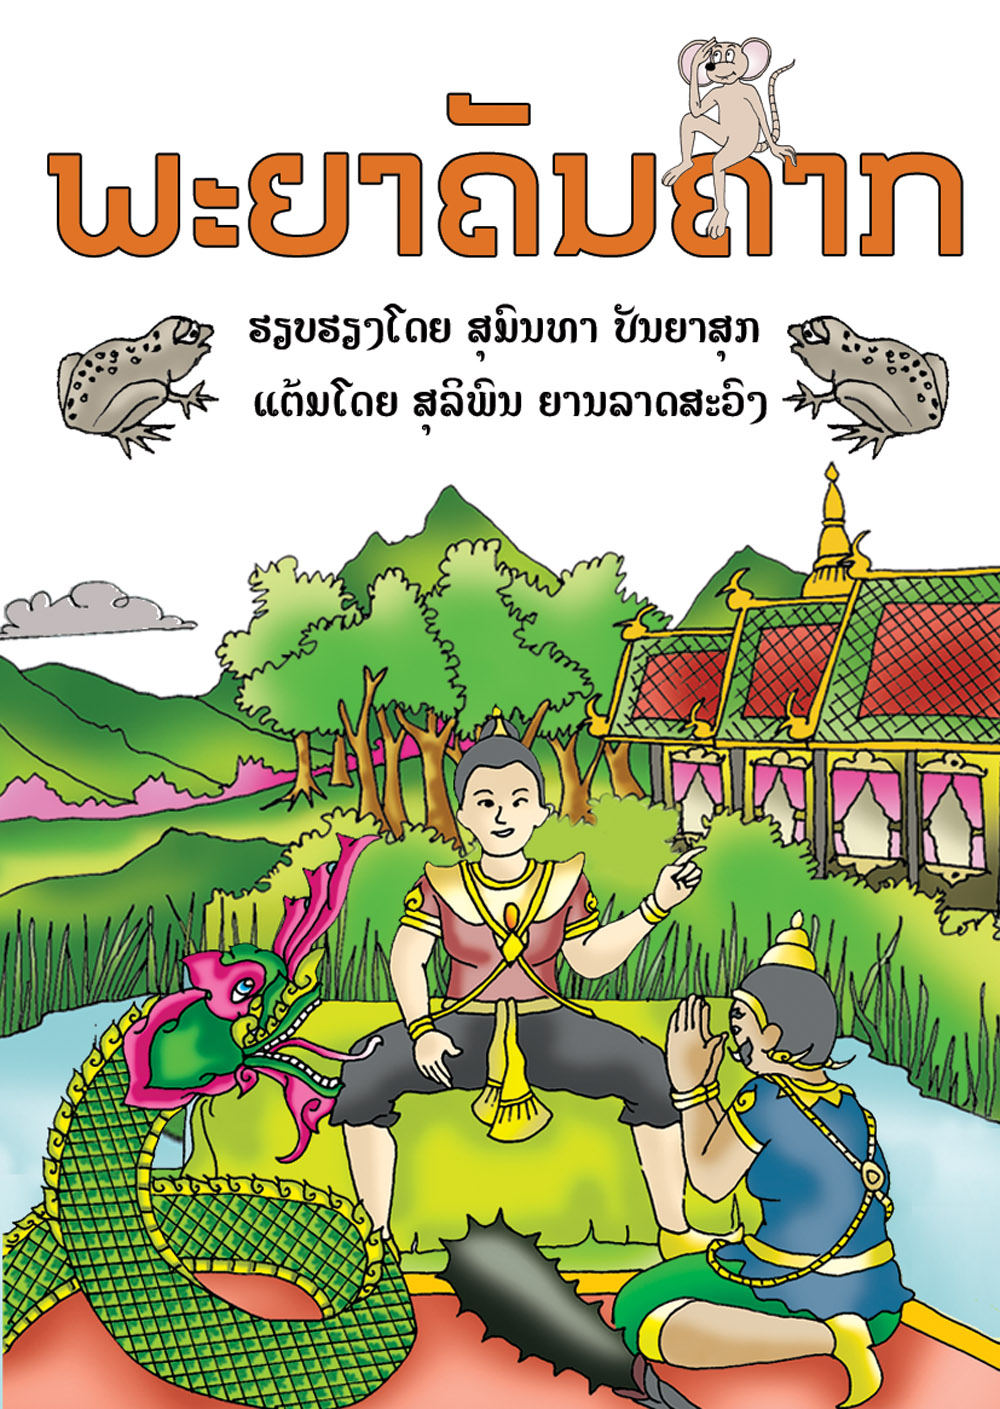 The Toad King large book cover, published in Lao language